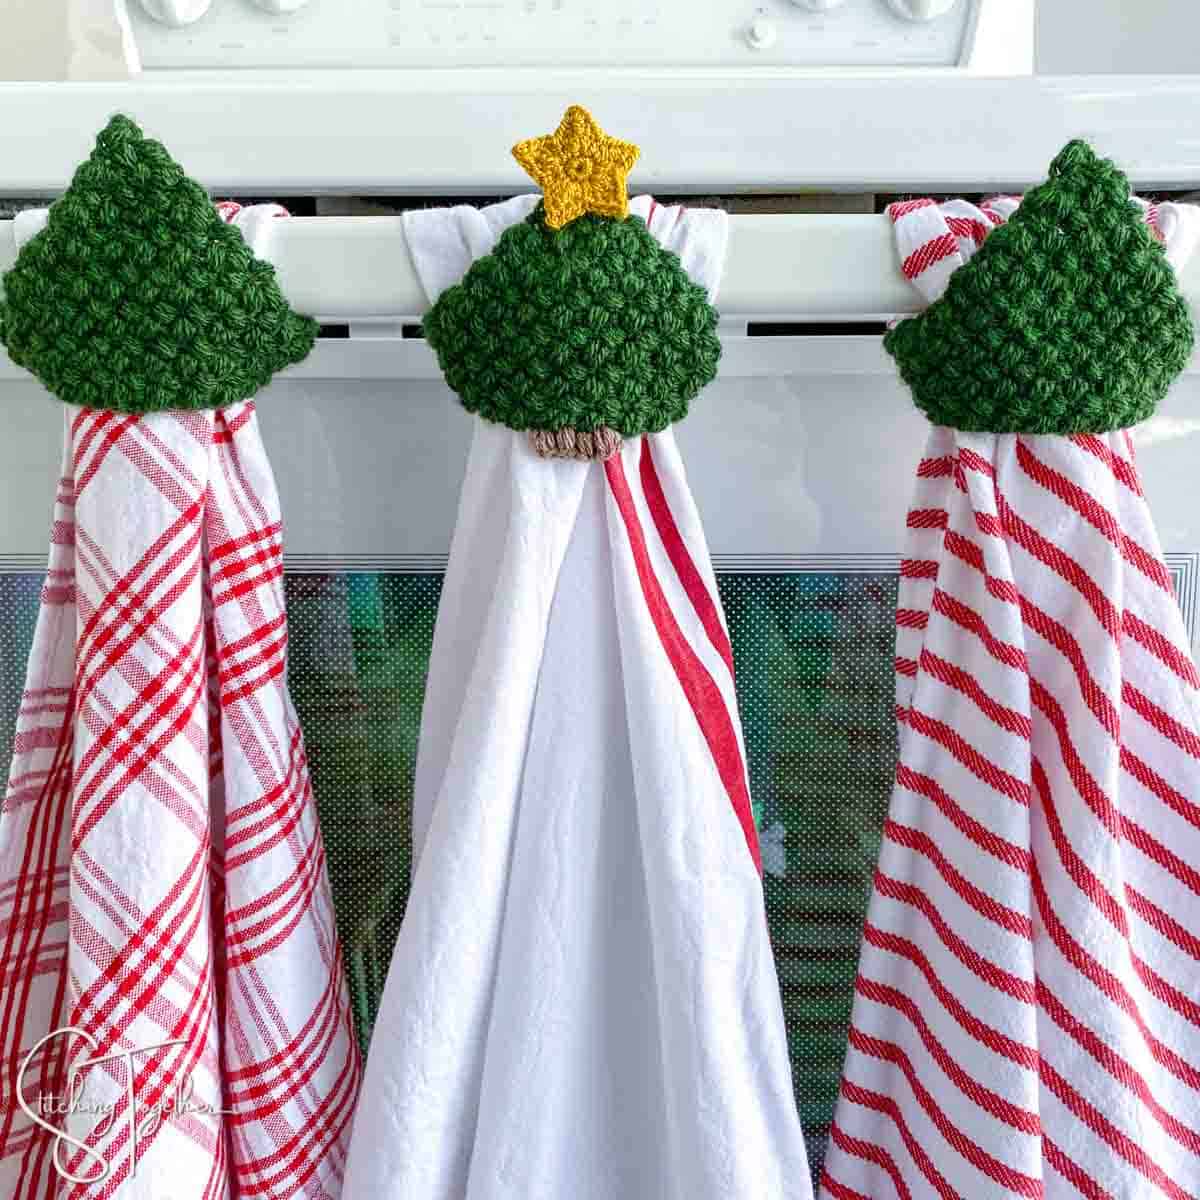 Double kitchen hanging towel xmas winter wine glasses crocheted black top 